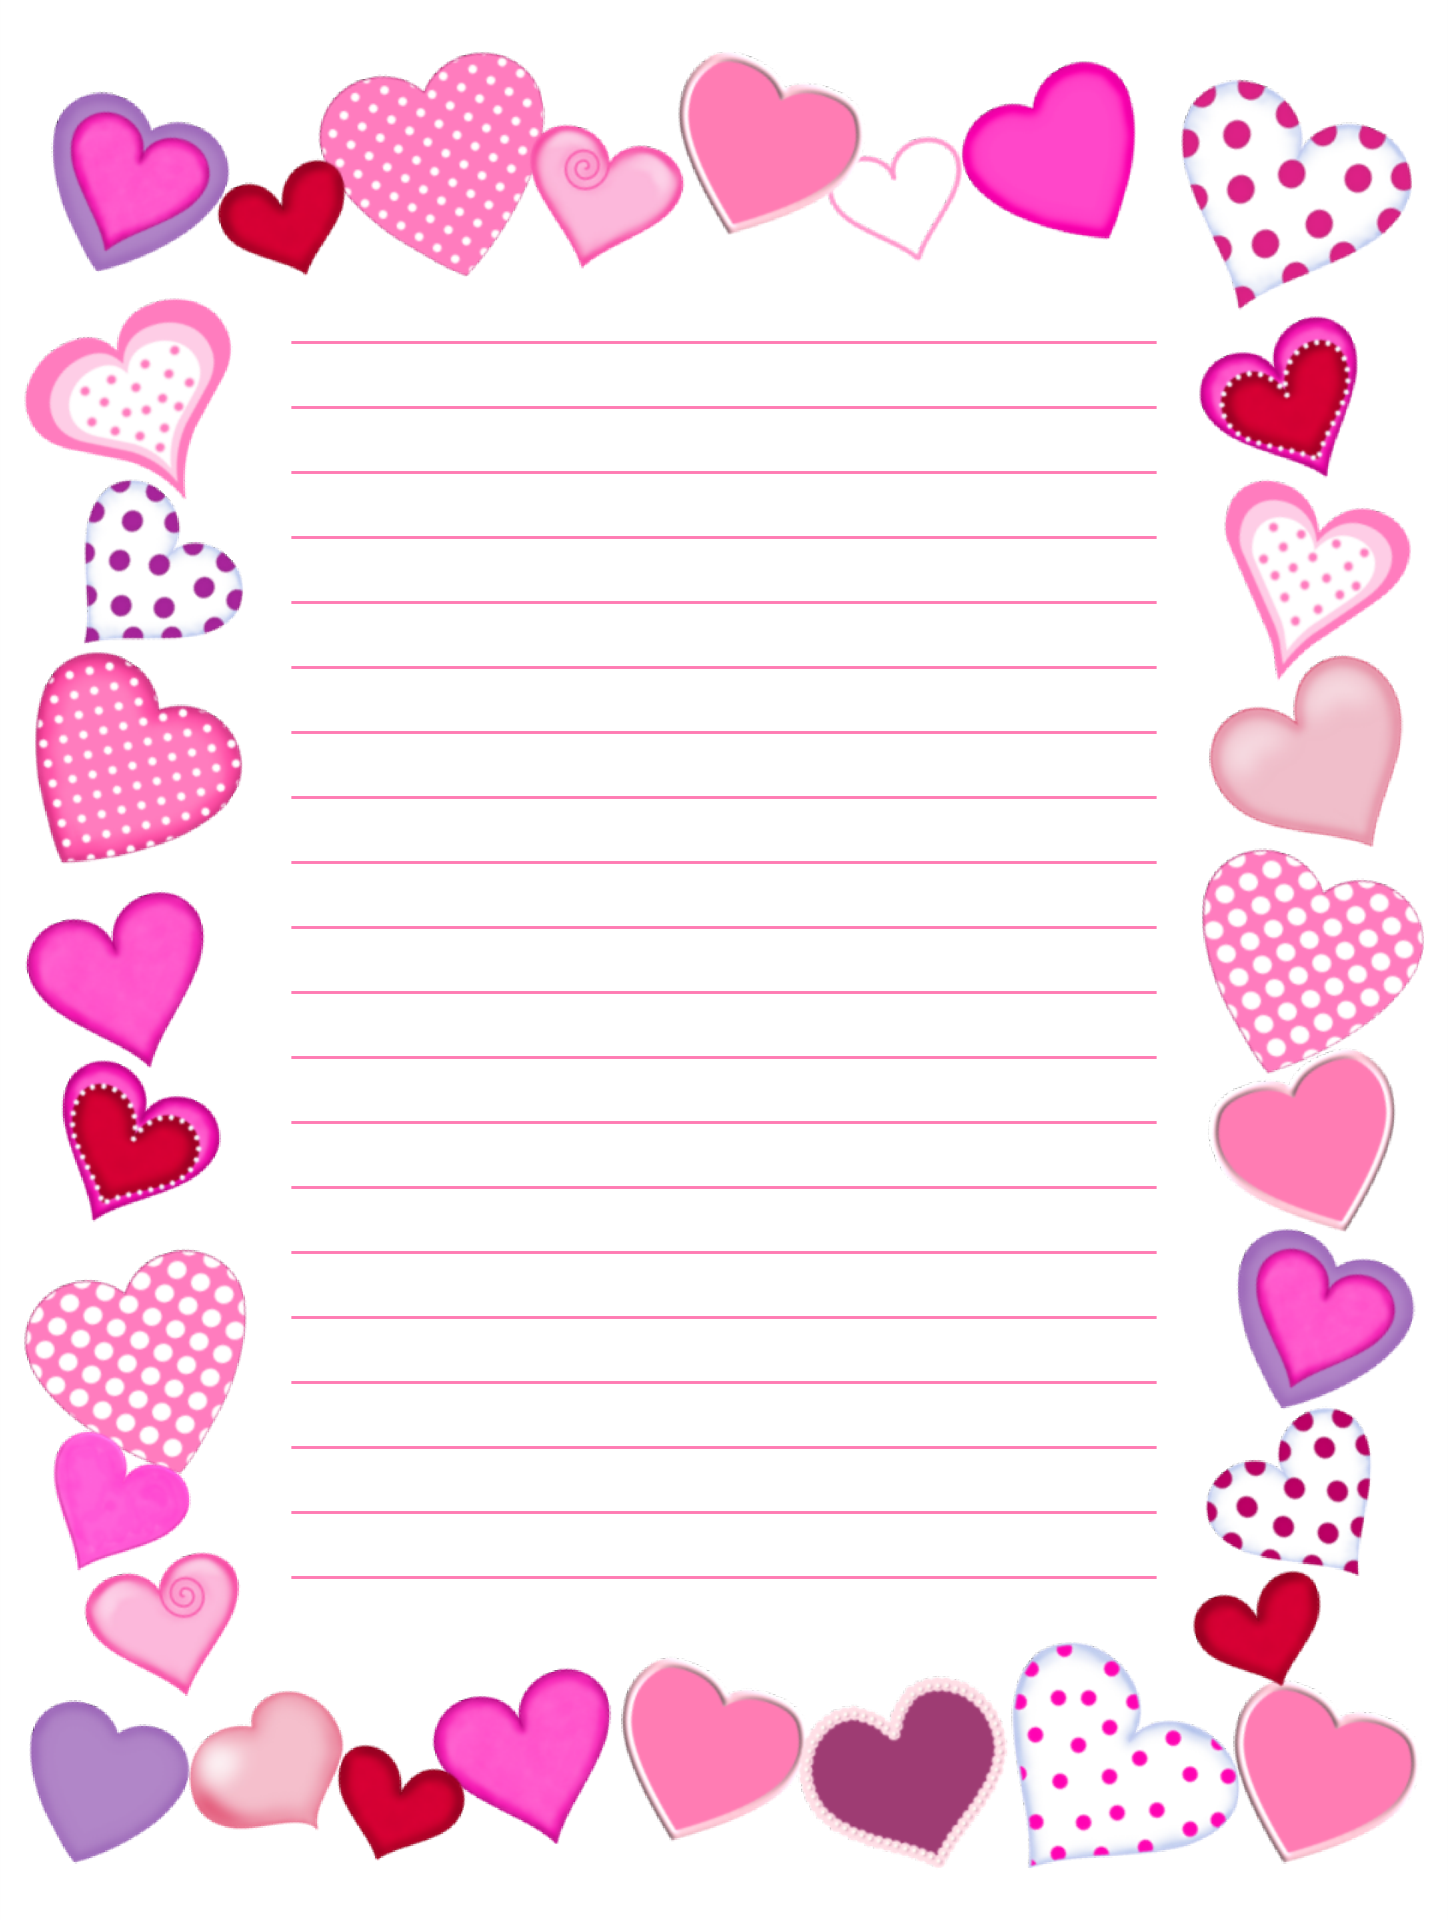 Letter Writing Paper with Borders